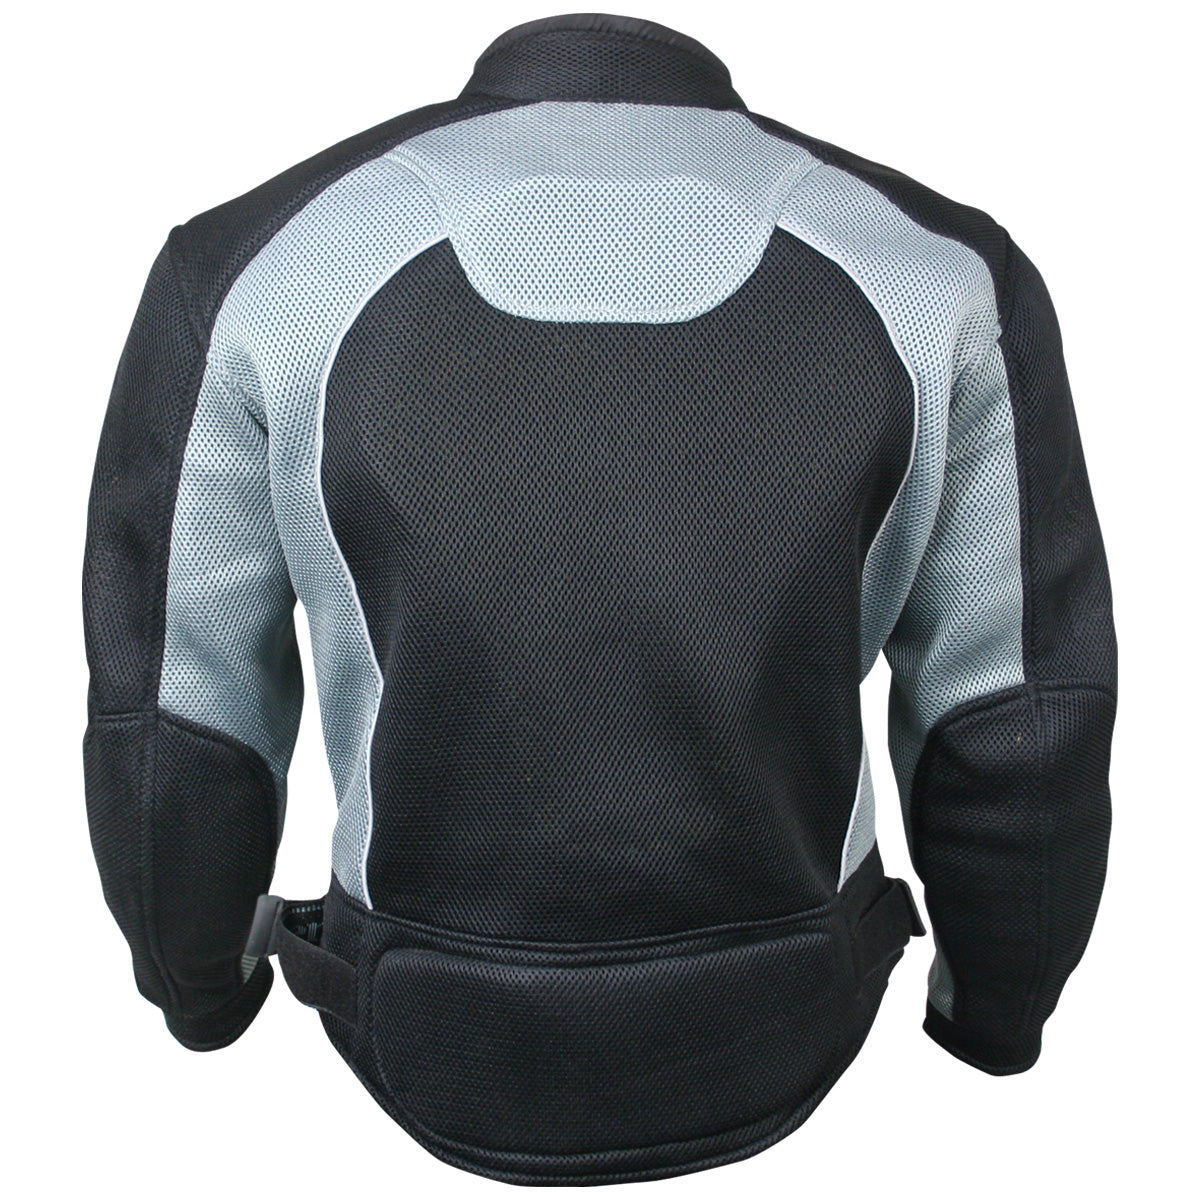 Xelement CF511 Men's 'Guardian' Black and Silver Mesh Sports Jacket with X-Armor Protection